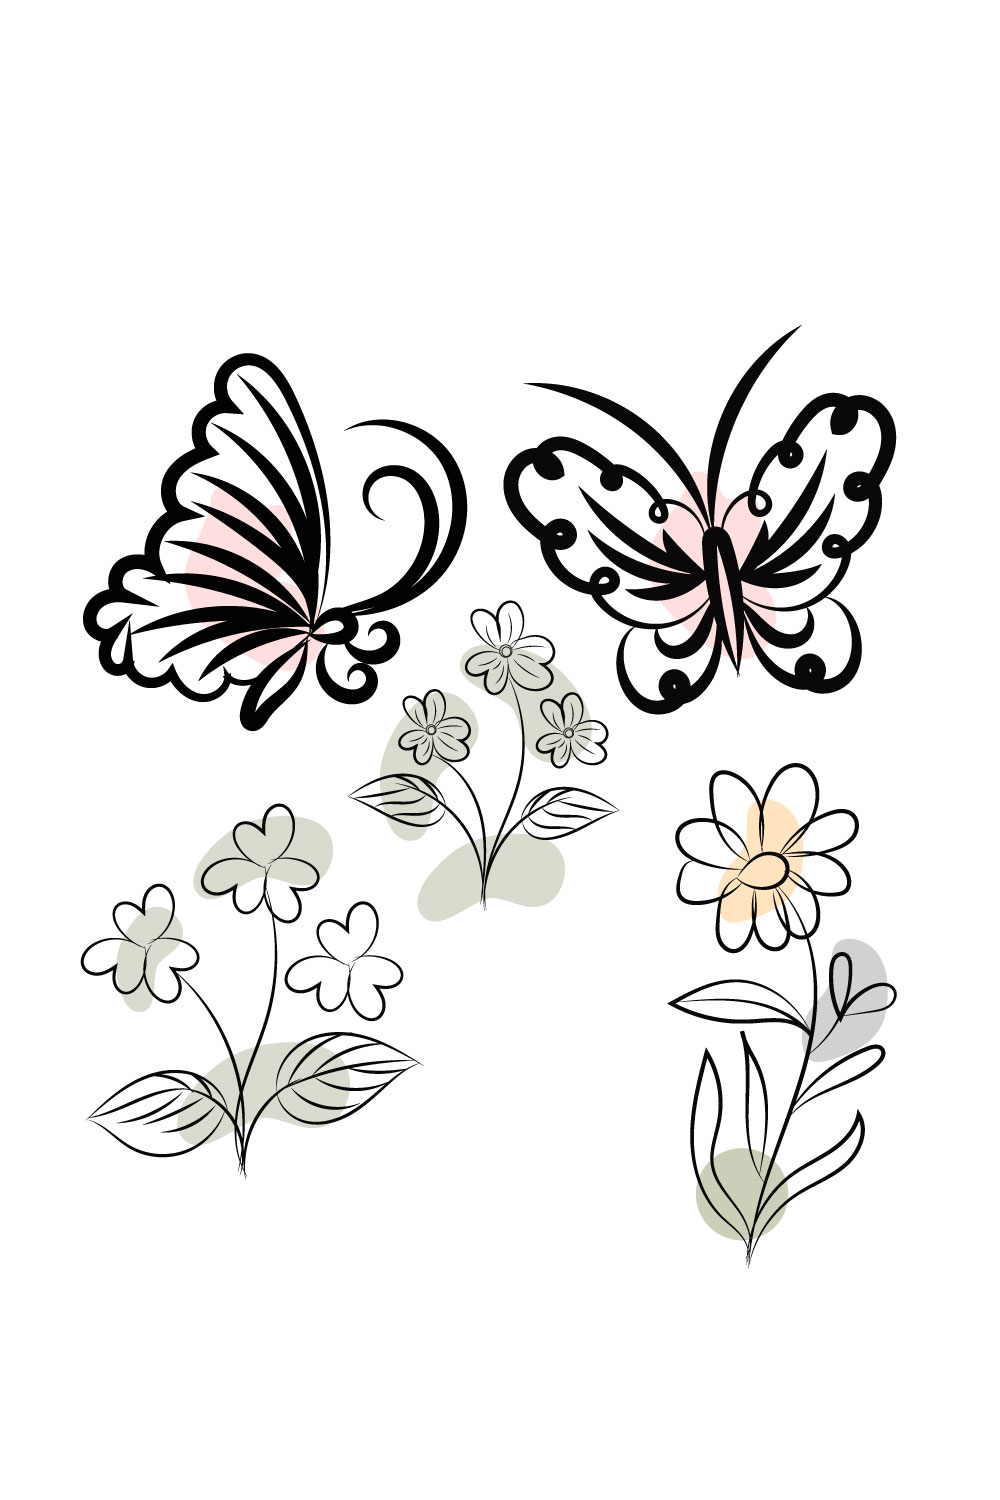 Drawing of three butterflies flying over a flower.